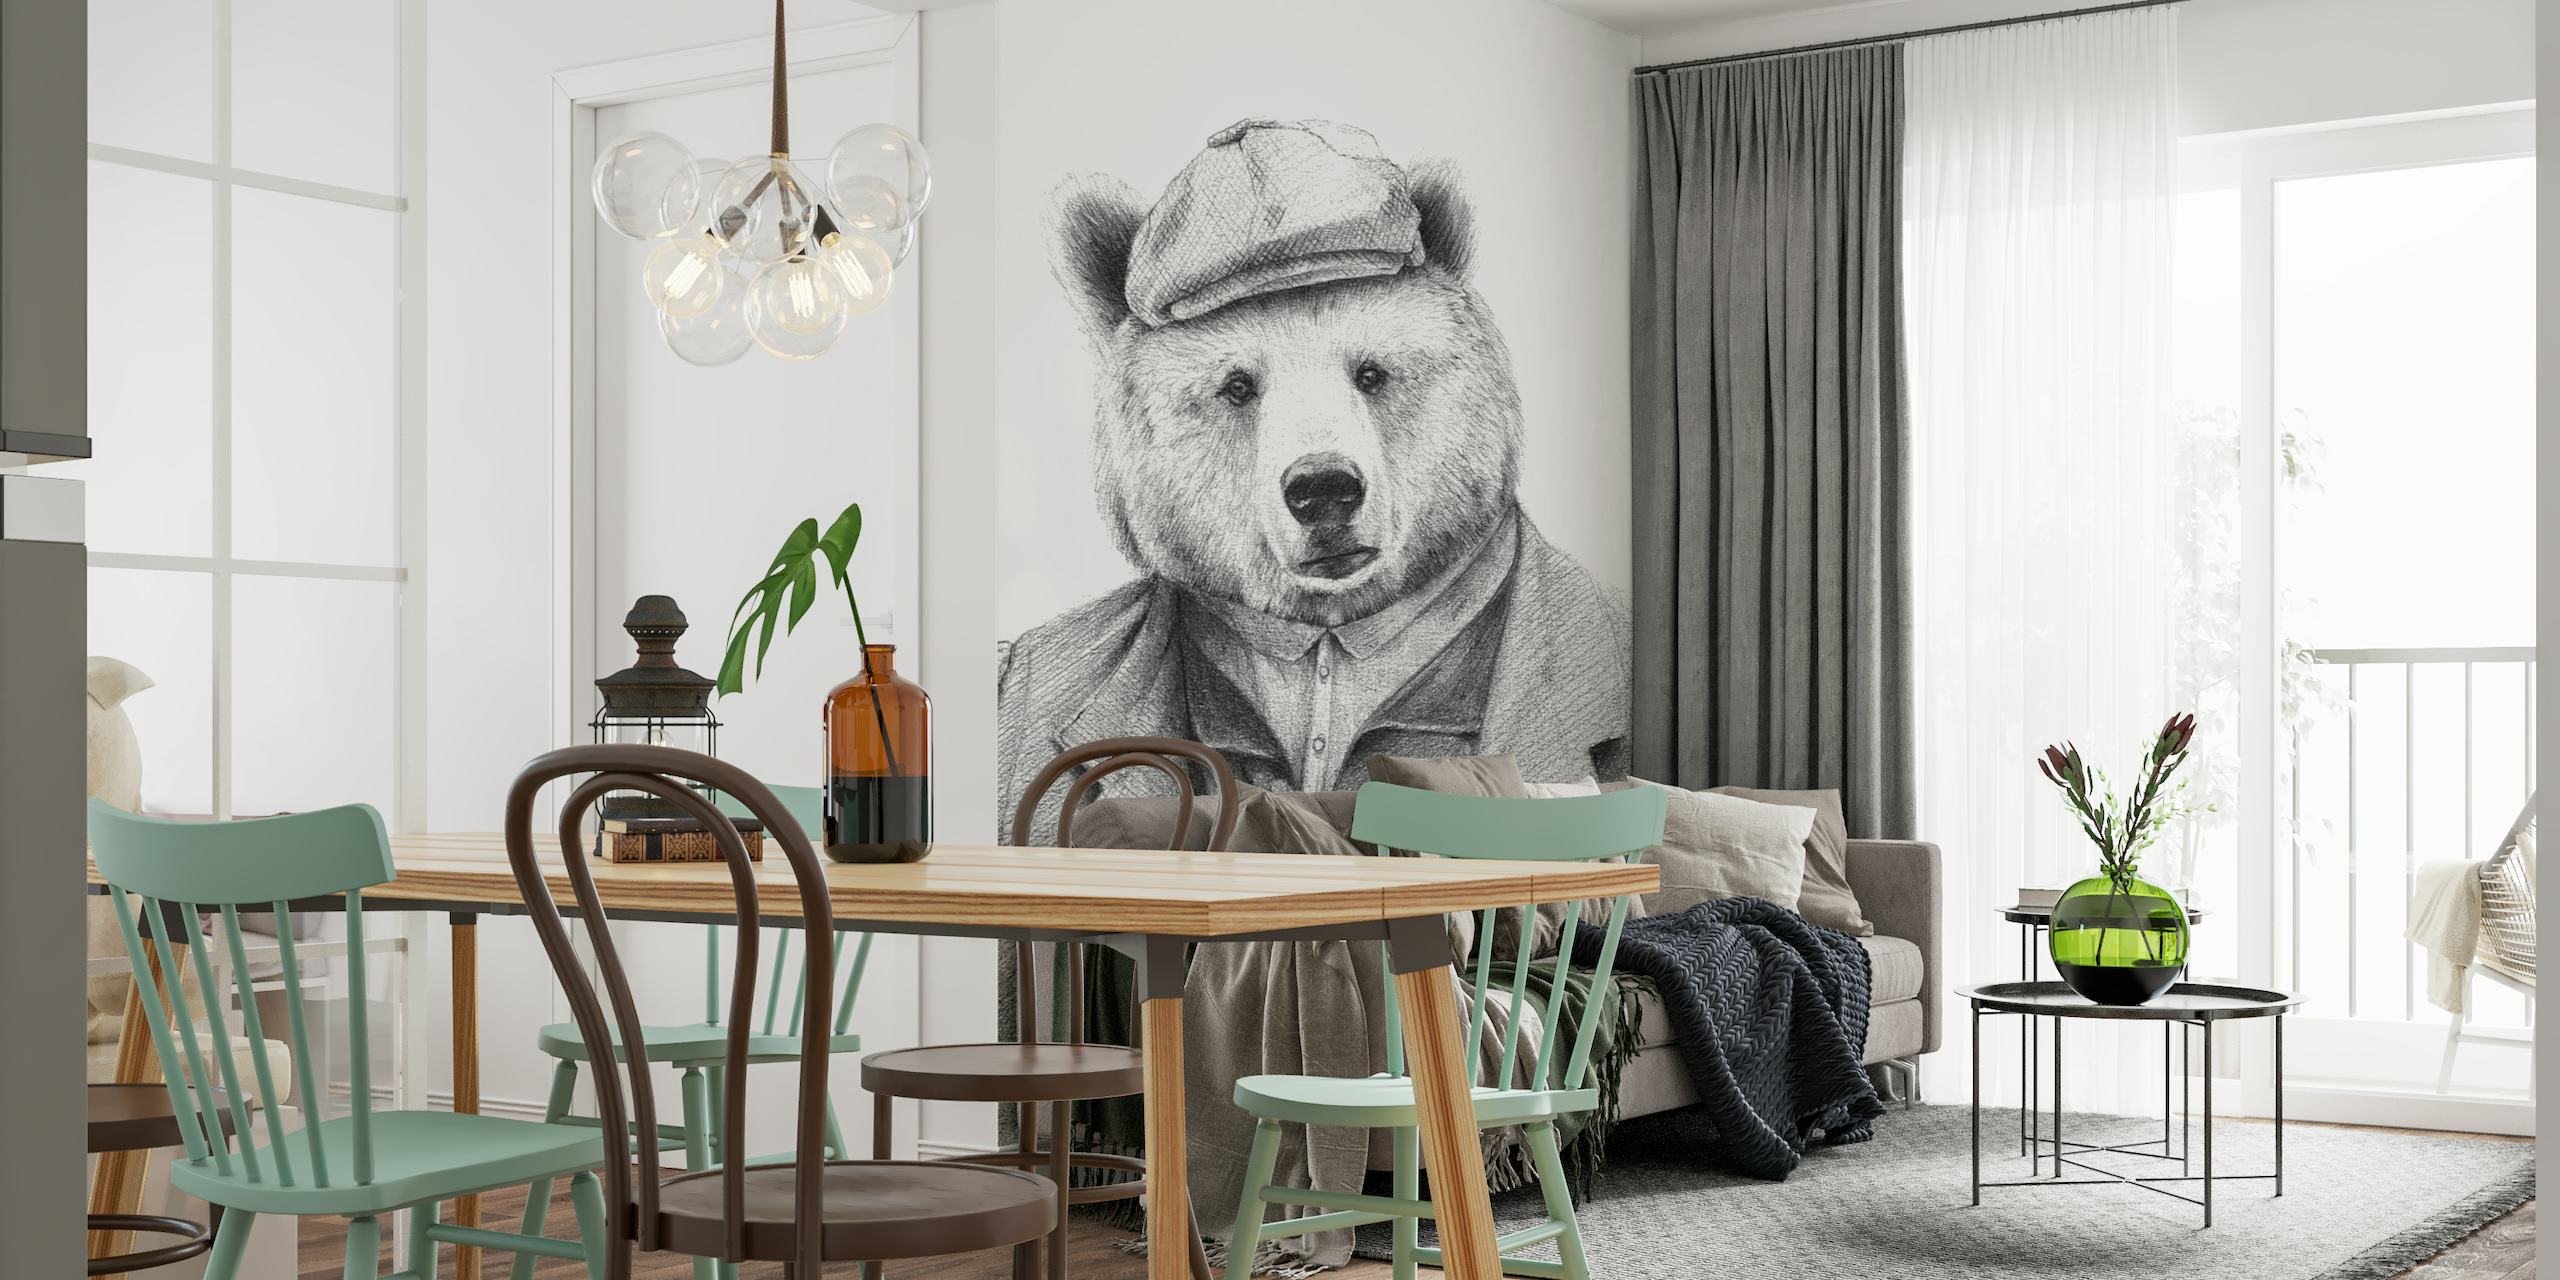 Bear in clothes wall mural illustration